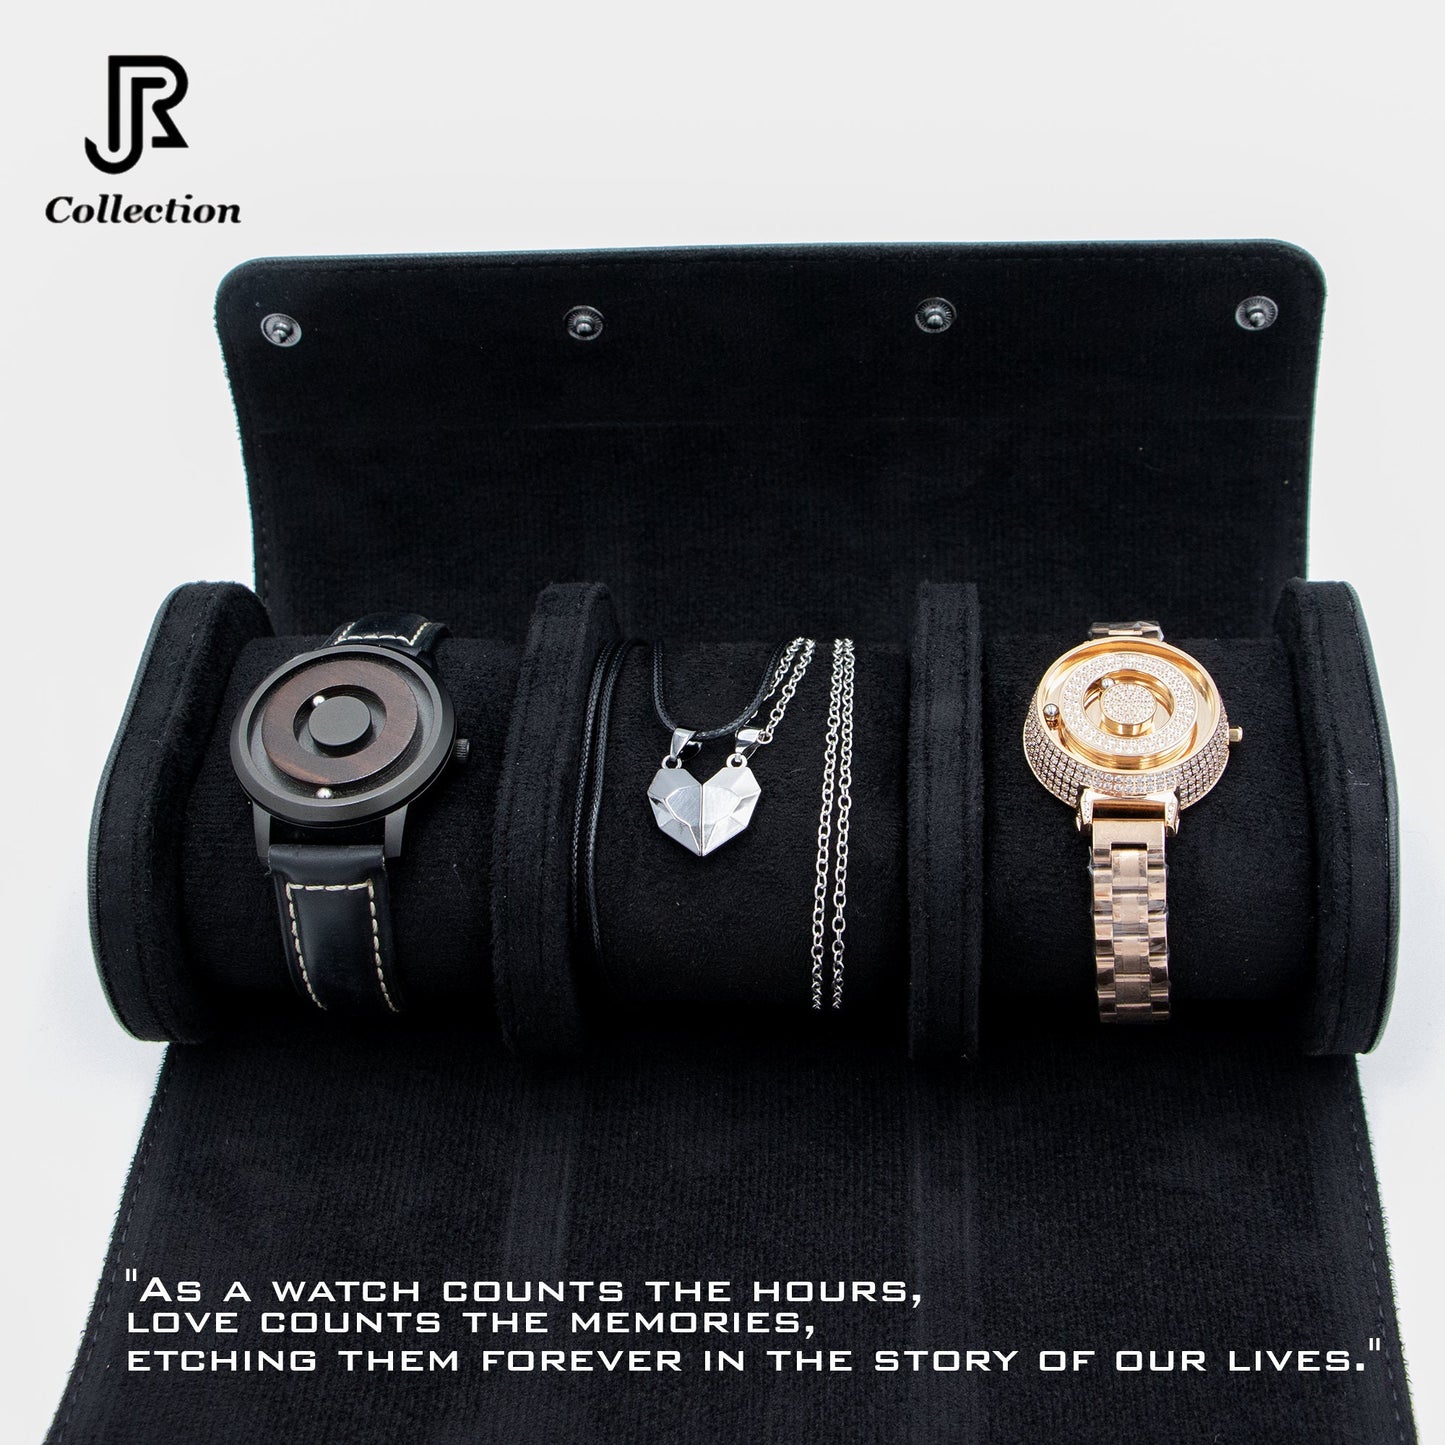 "Perfect Gifts: Magnetic Watches & Necklaces for Her, Him & Special Occasions"